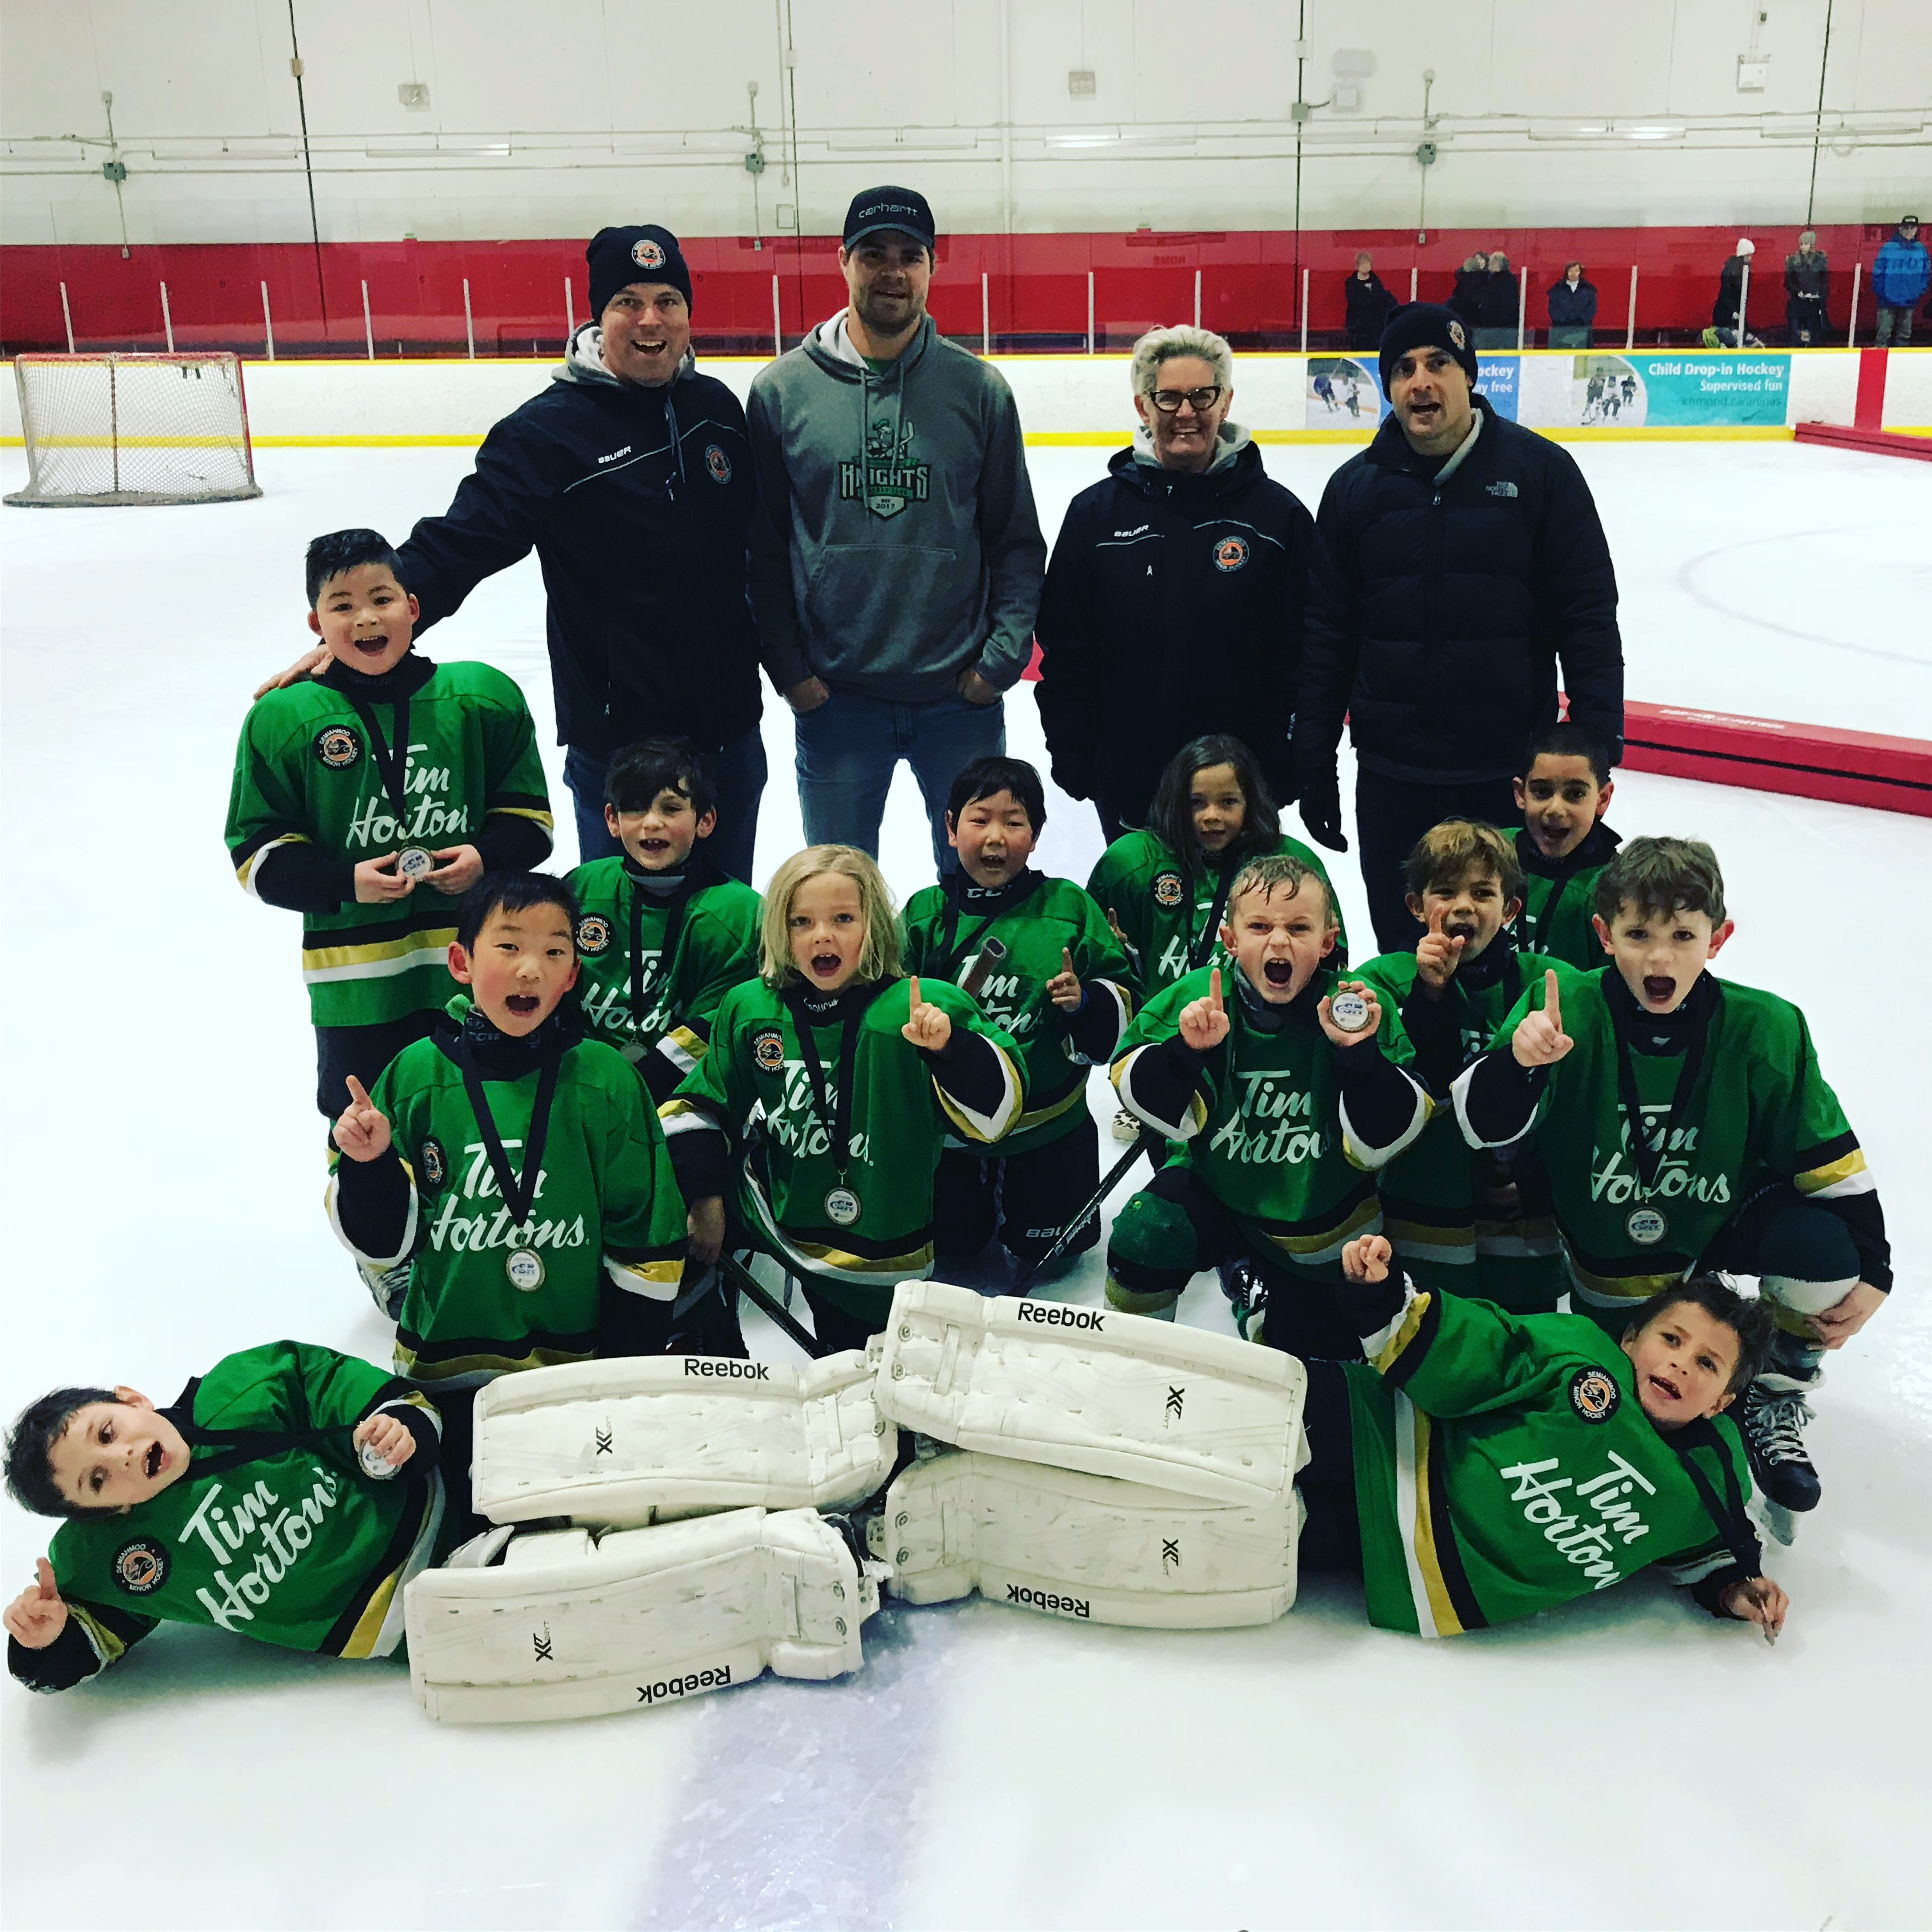 Novice Minor Knights played in the RIC Tournament Jan 5-7, 2018. Although scores were not kept, this team had a winning attitude!